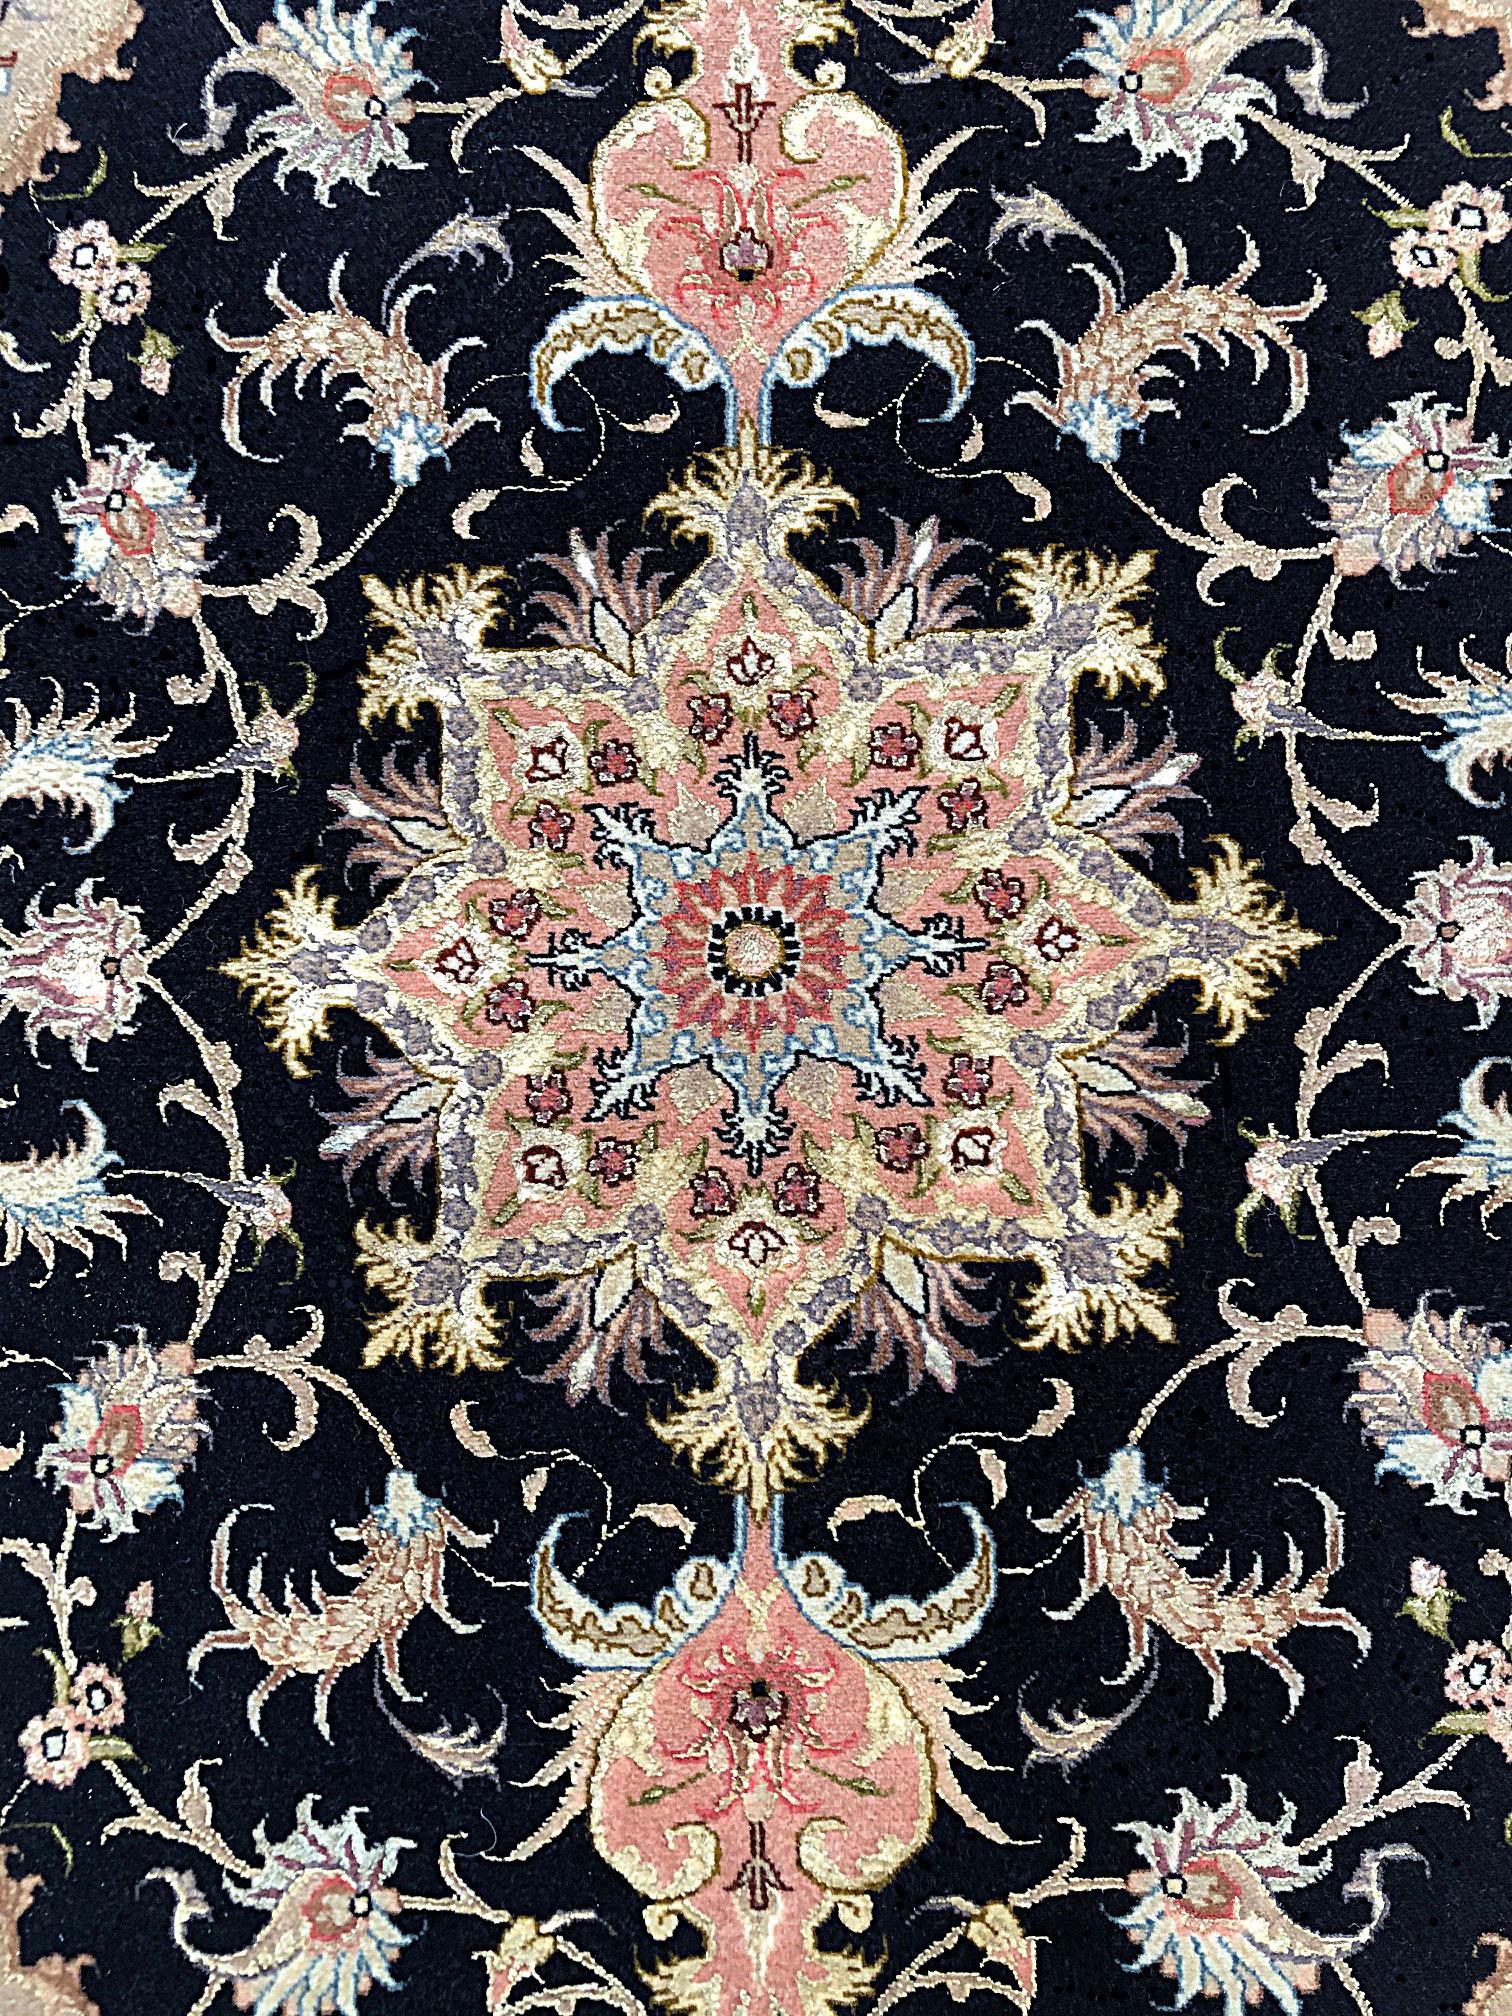 Authentic Persian Hand Knotted Repeated Medallion Floral Tabriz Black Runner Rug In New Condition For Sale In San Diego, CA